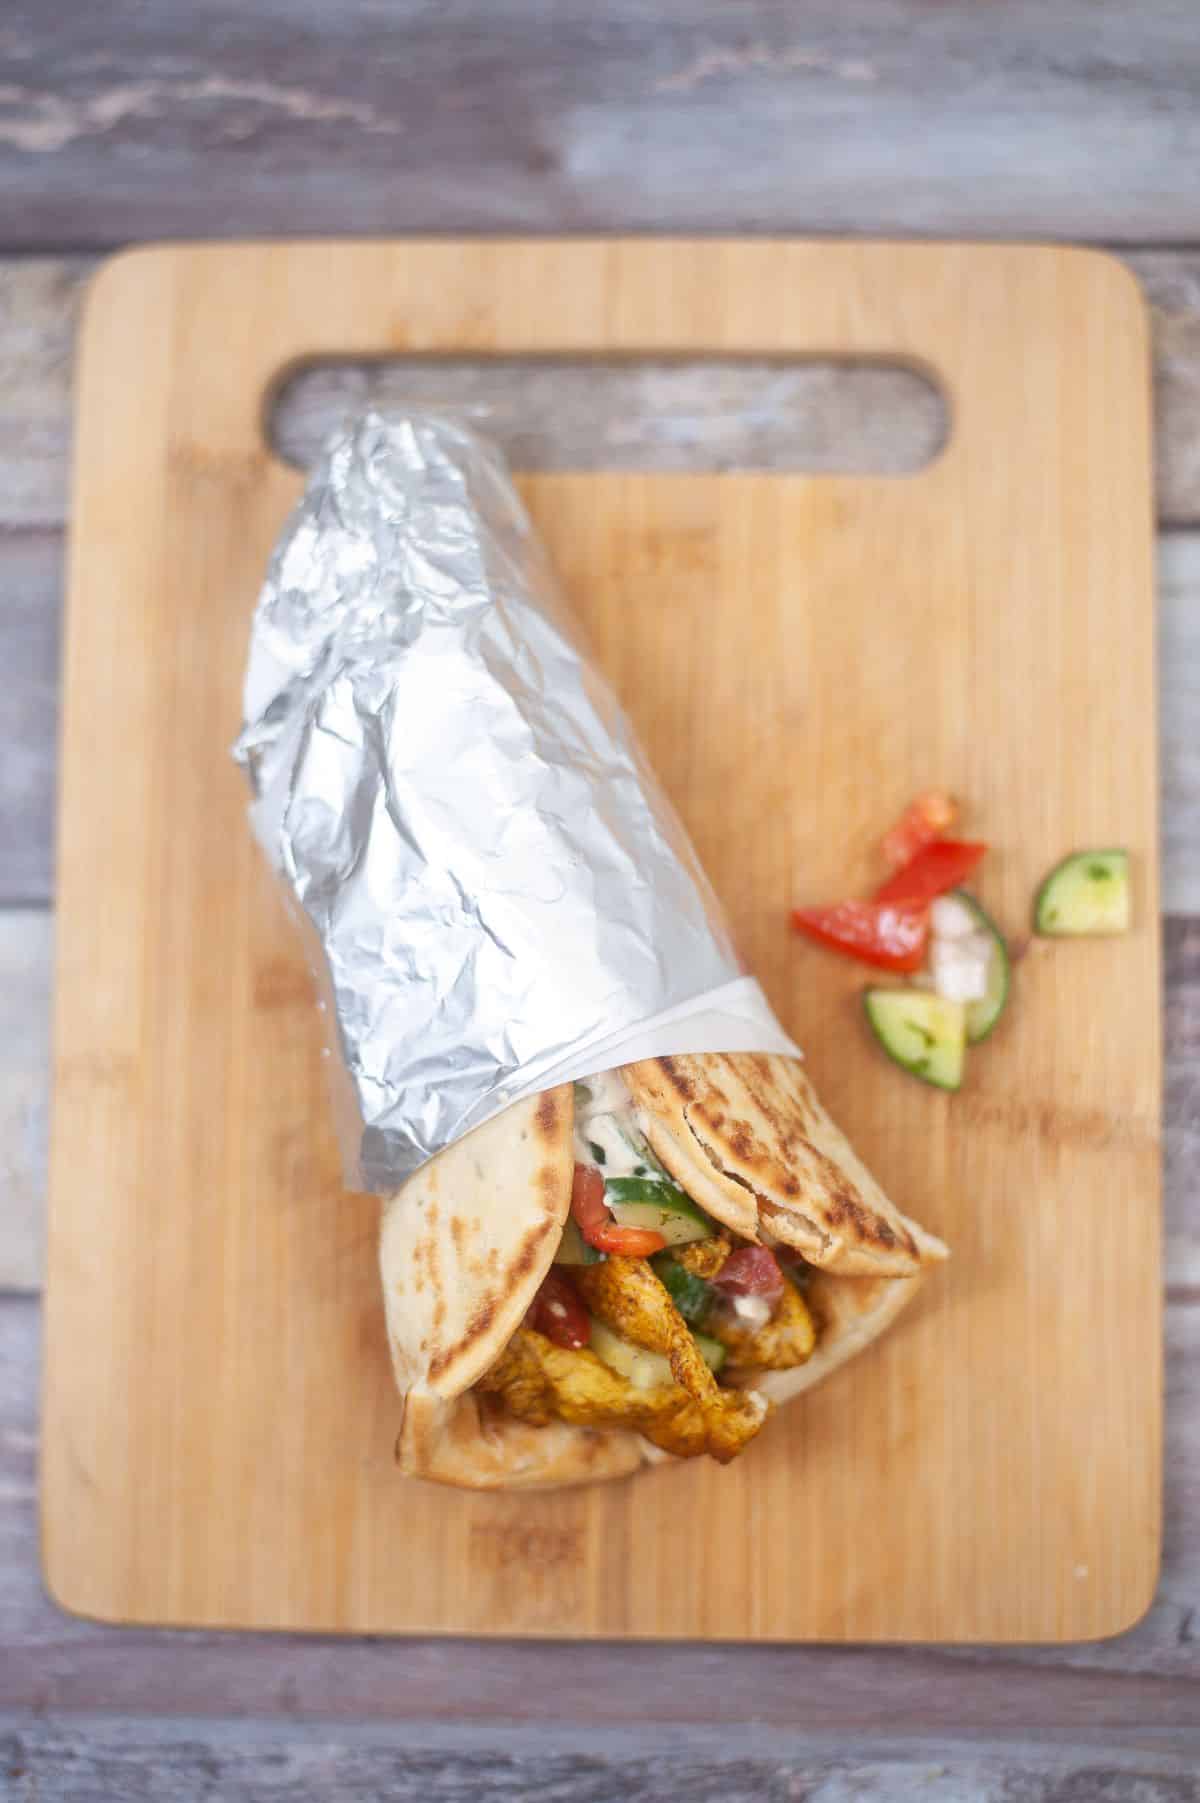 Chicken shawarma wrapped in foil arranged on a wooden chopping board.